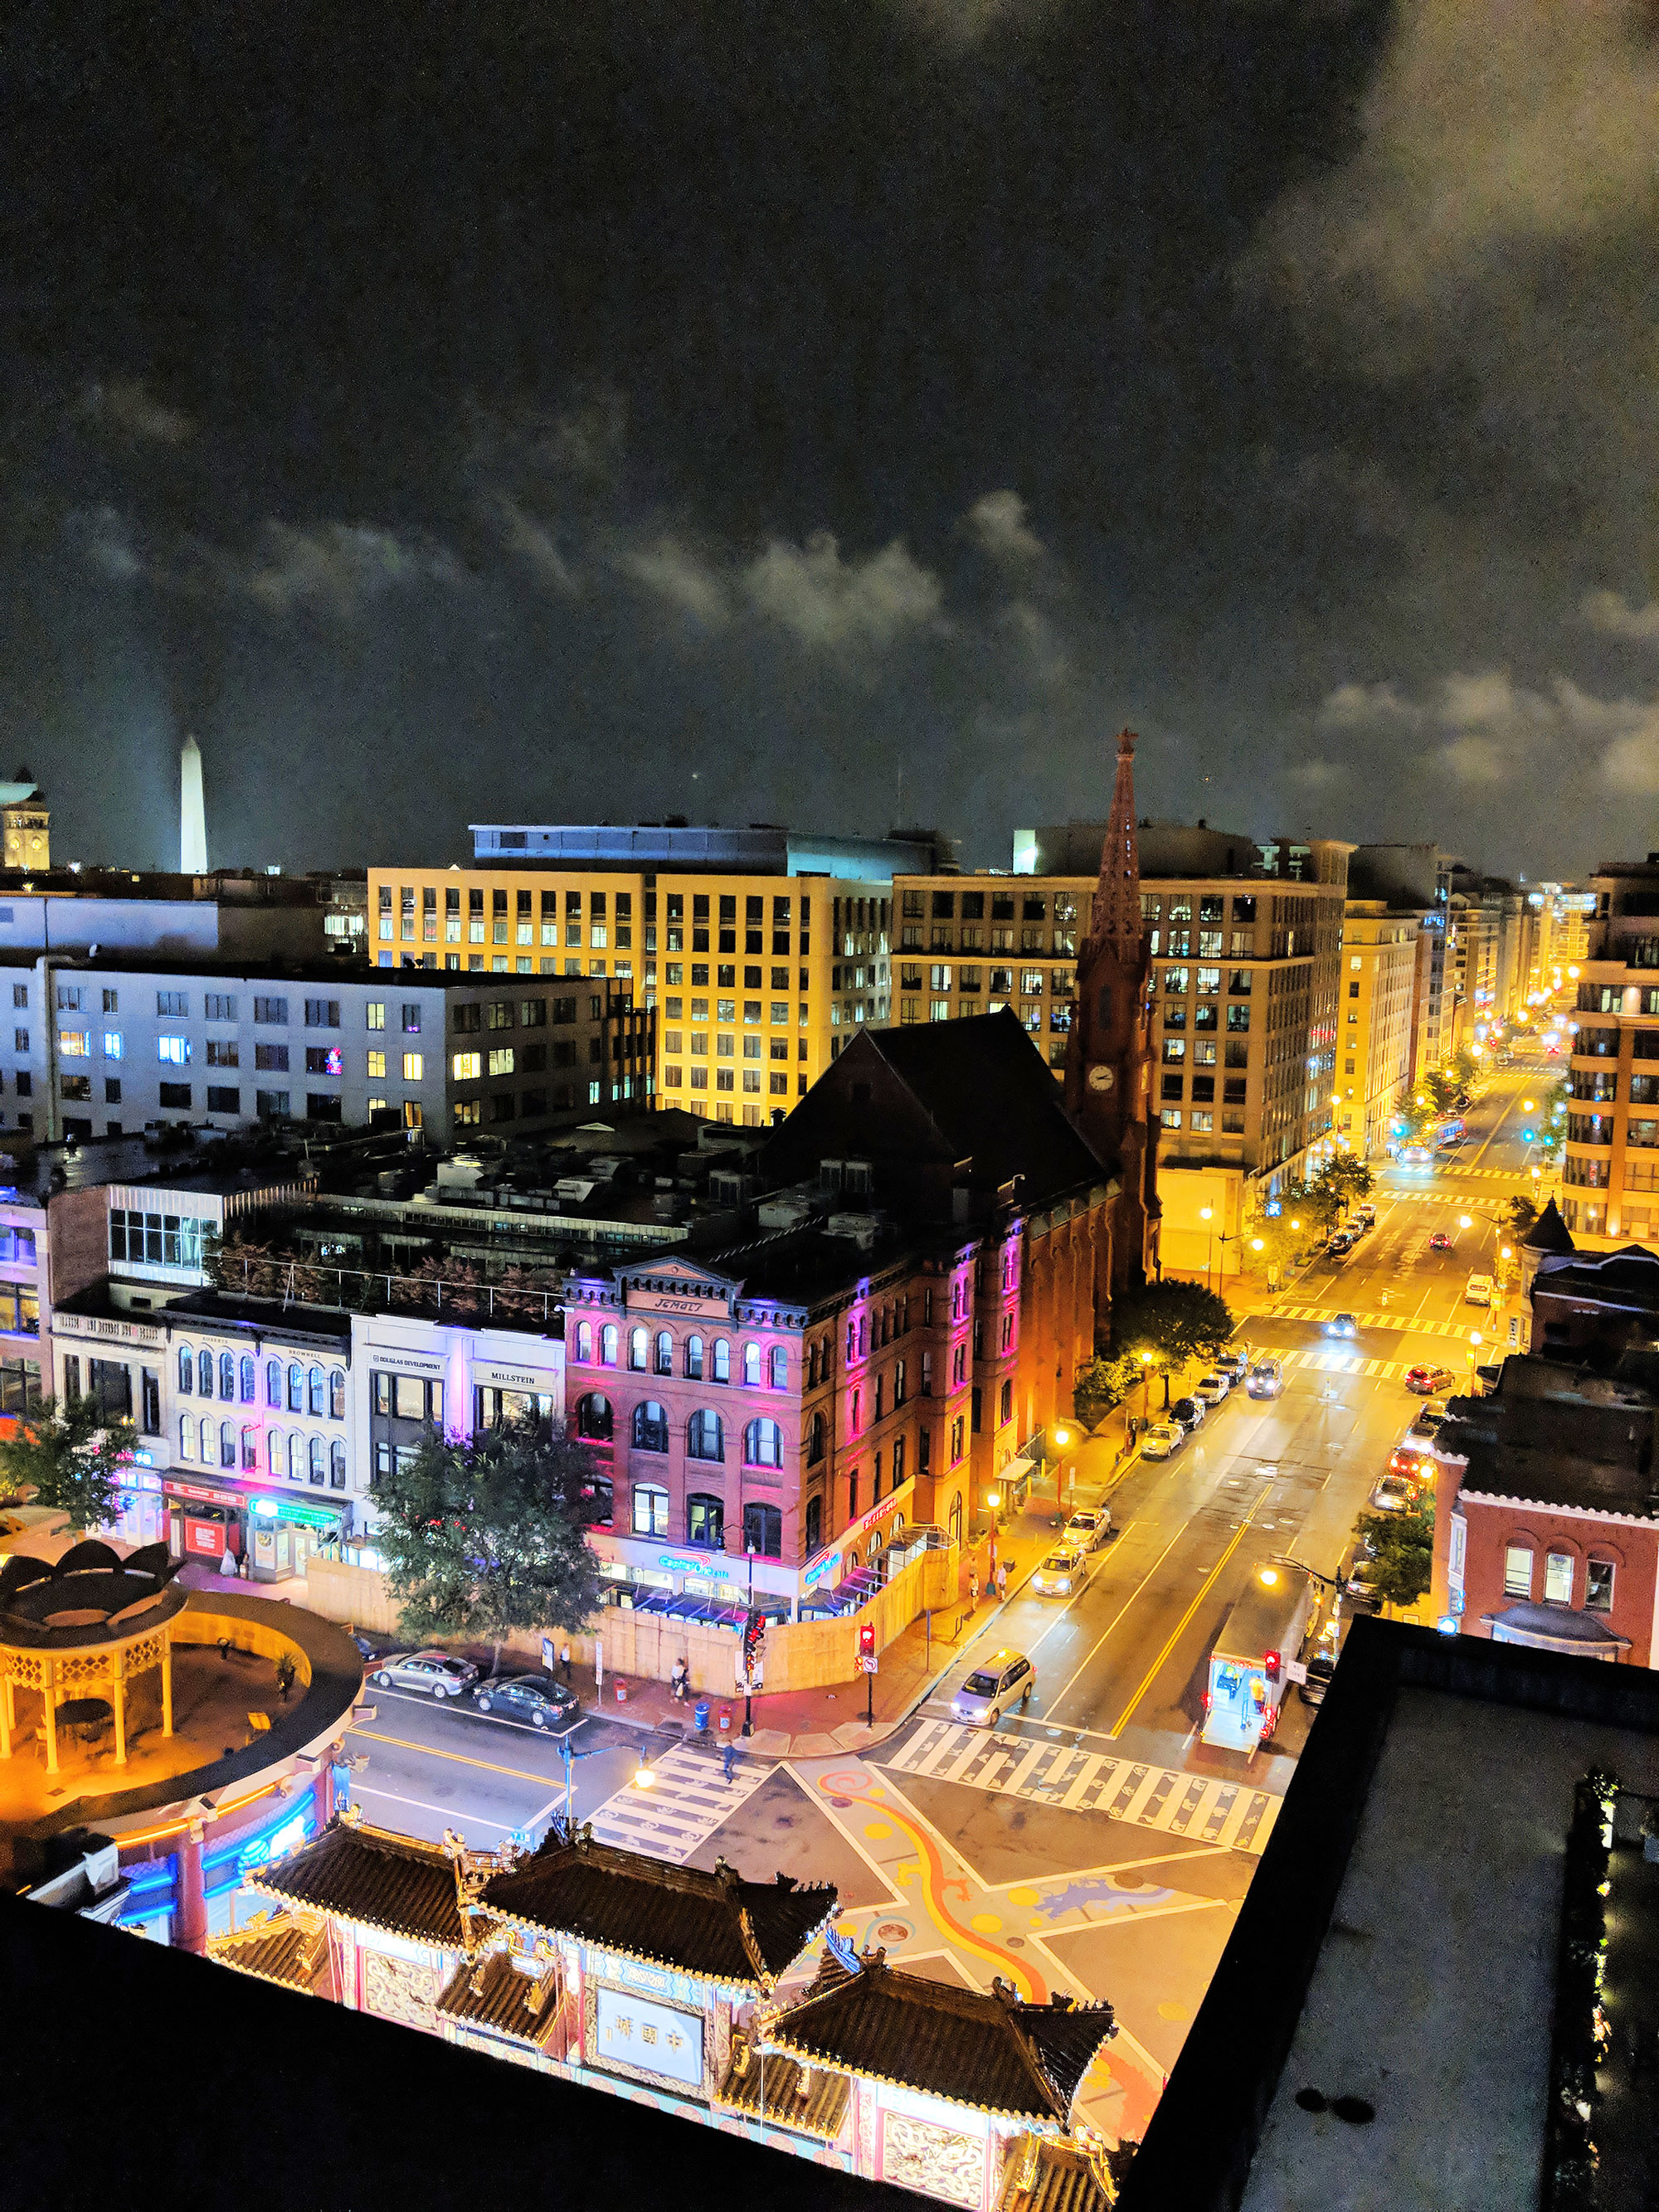 The view of Chinatown from the Pod Hotel's Crimson View rooftop.